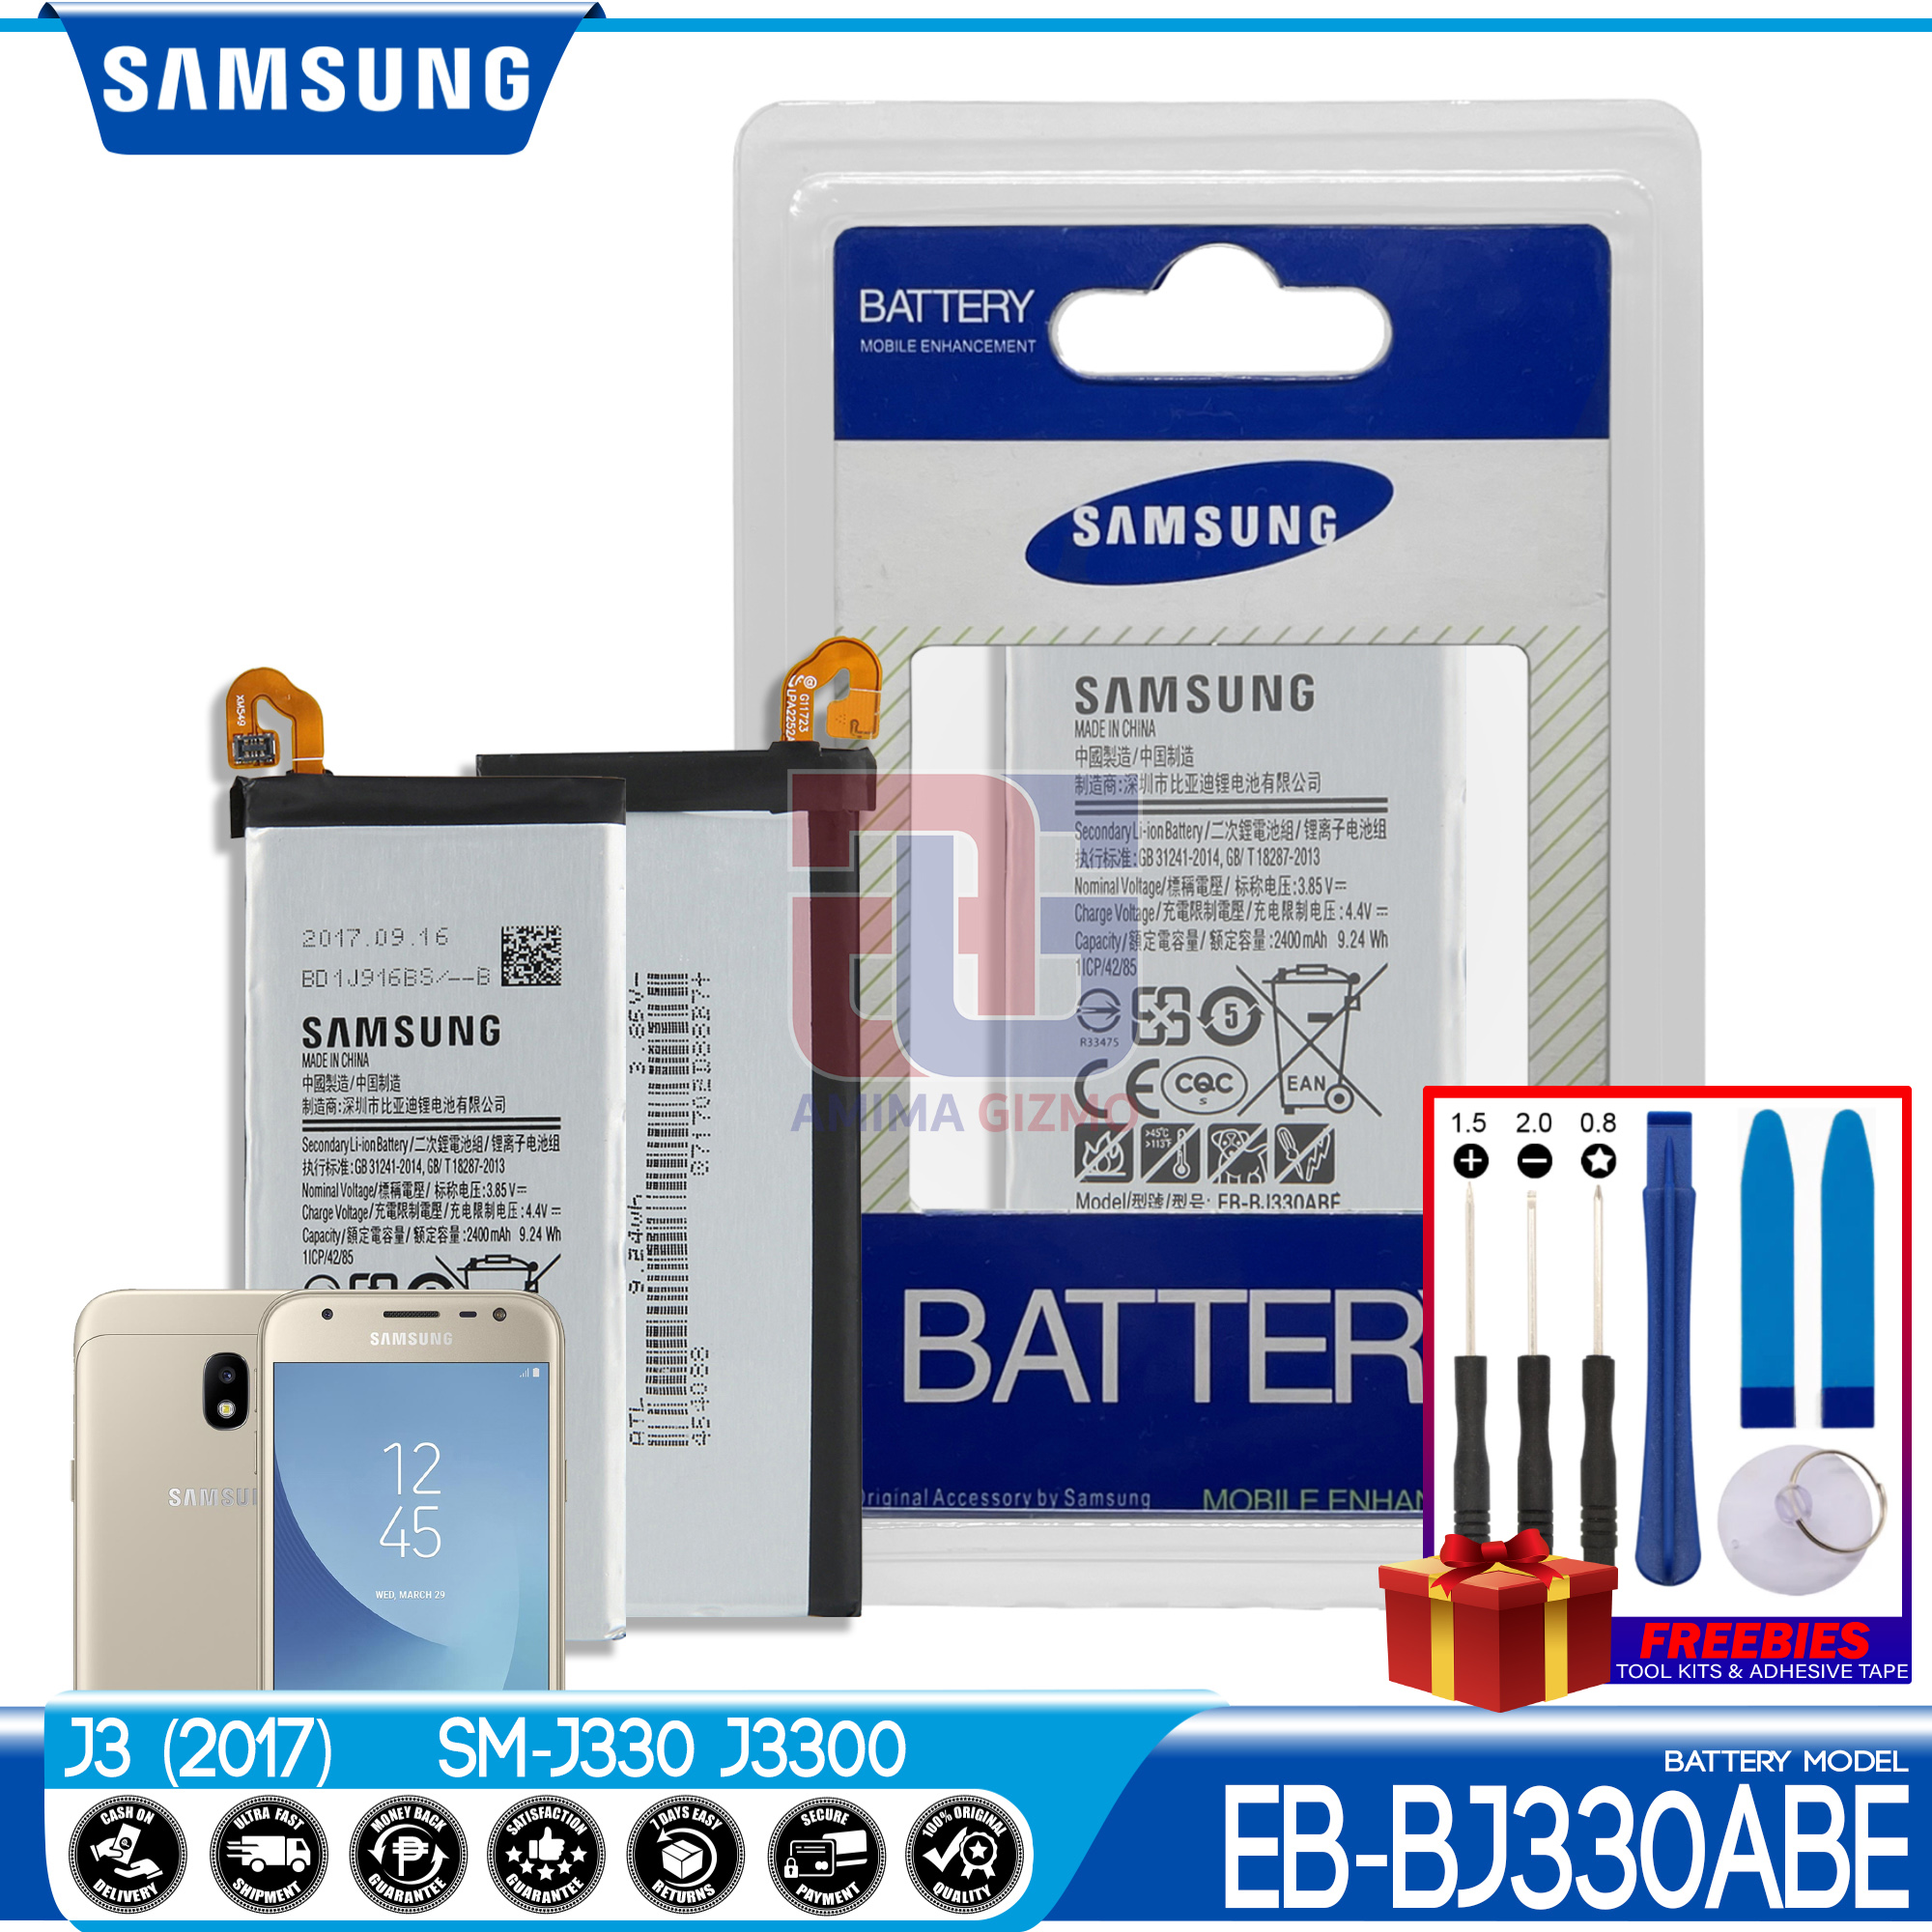 Samsung Galaxy J3 17 Battery Original Quality And Capacity Model Eb Bj330abe Fit For J3 Pro 17 Sm J330f Ds Amima Gizmo Built In Replacement Same Size As Authentic Smart Phone Batteries Support Fast Charger